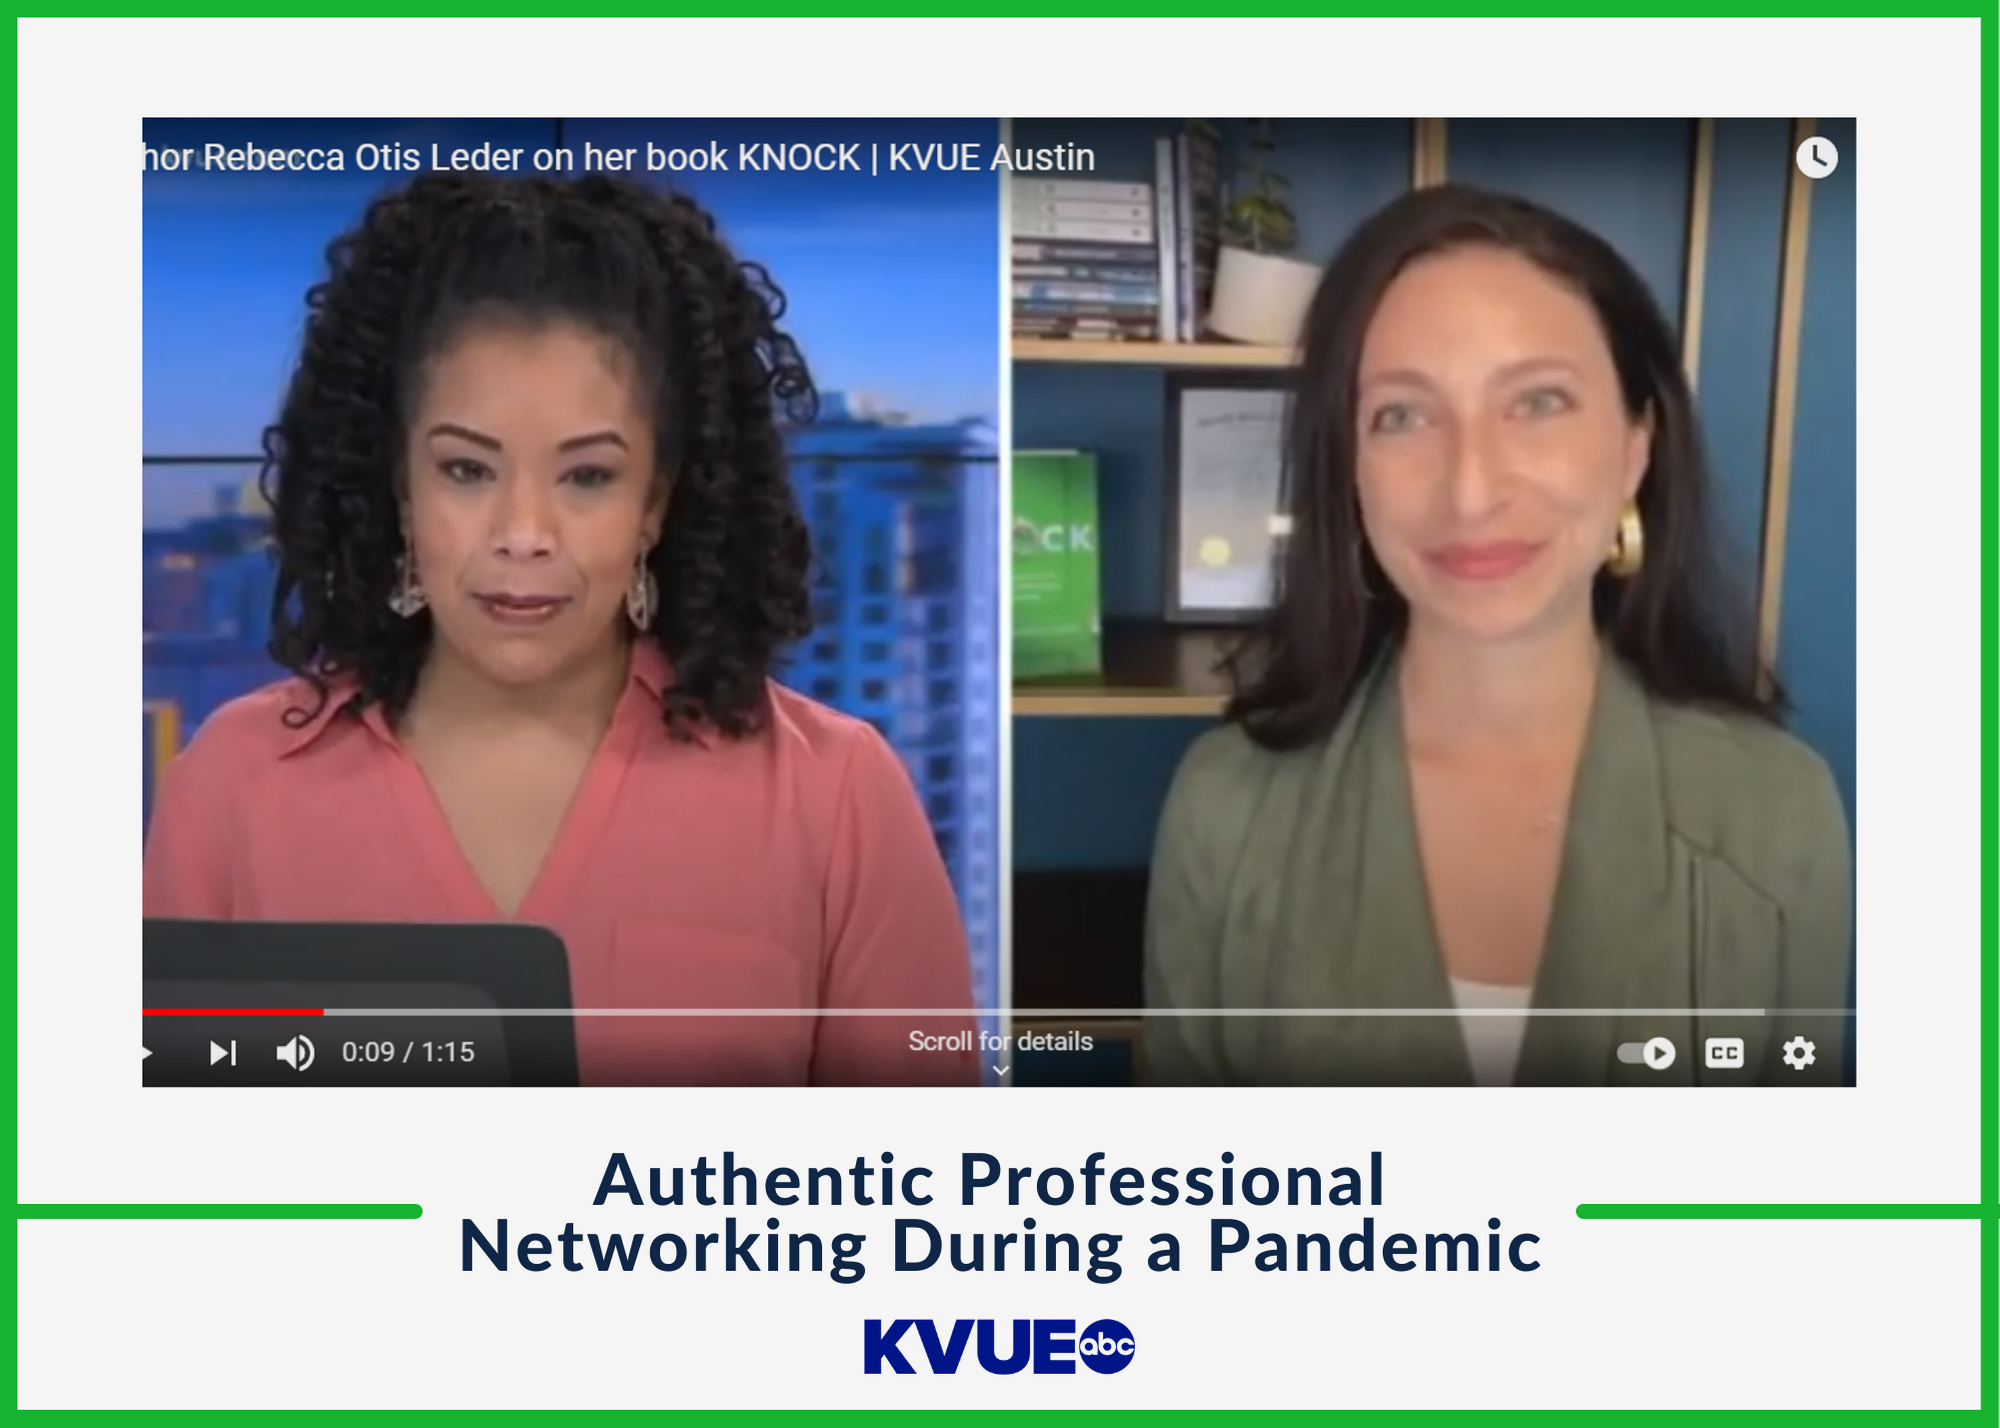 Authentic Professional Networking During a Pandemic